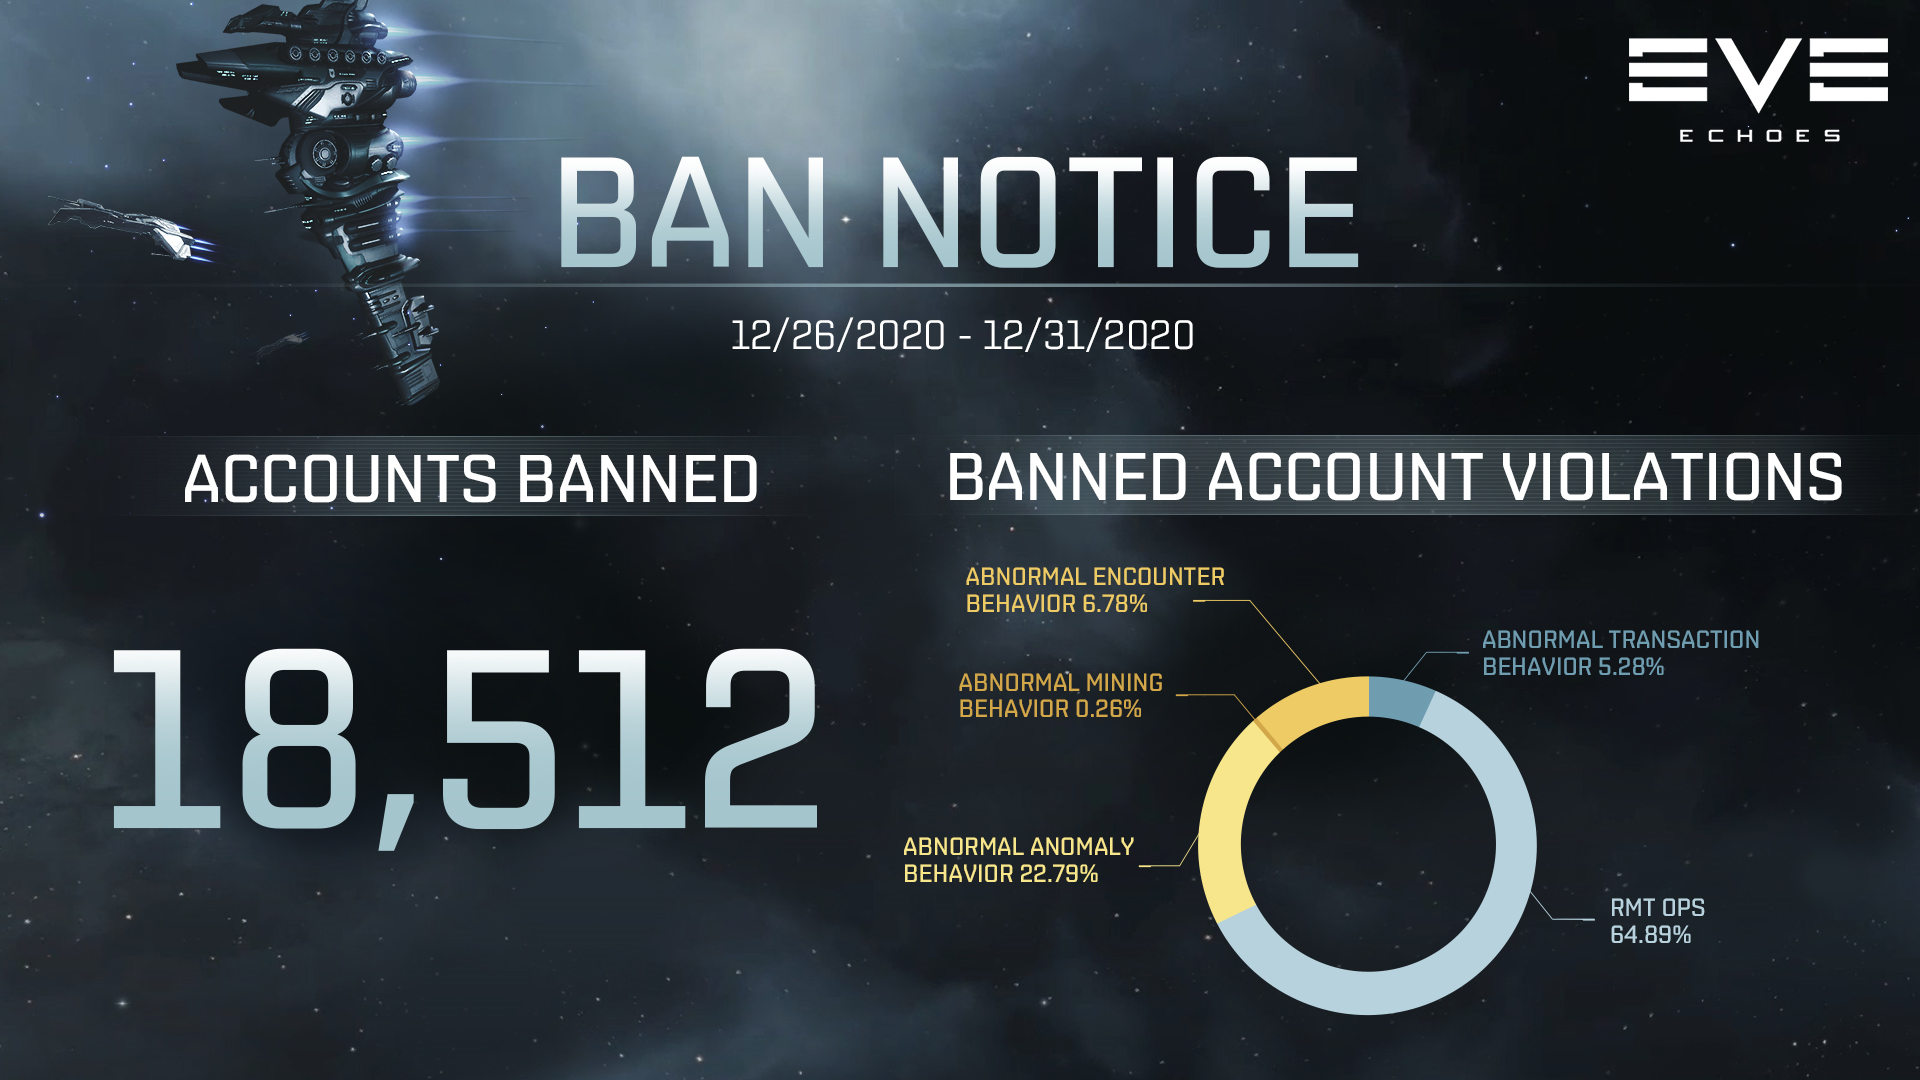 Ban Notice for 12/26-12/31